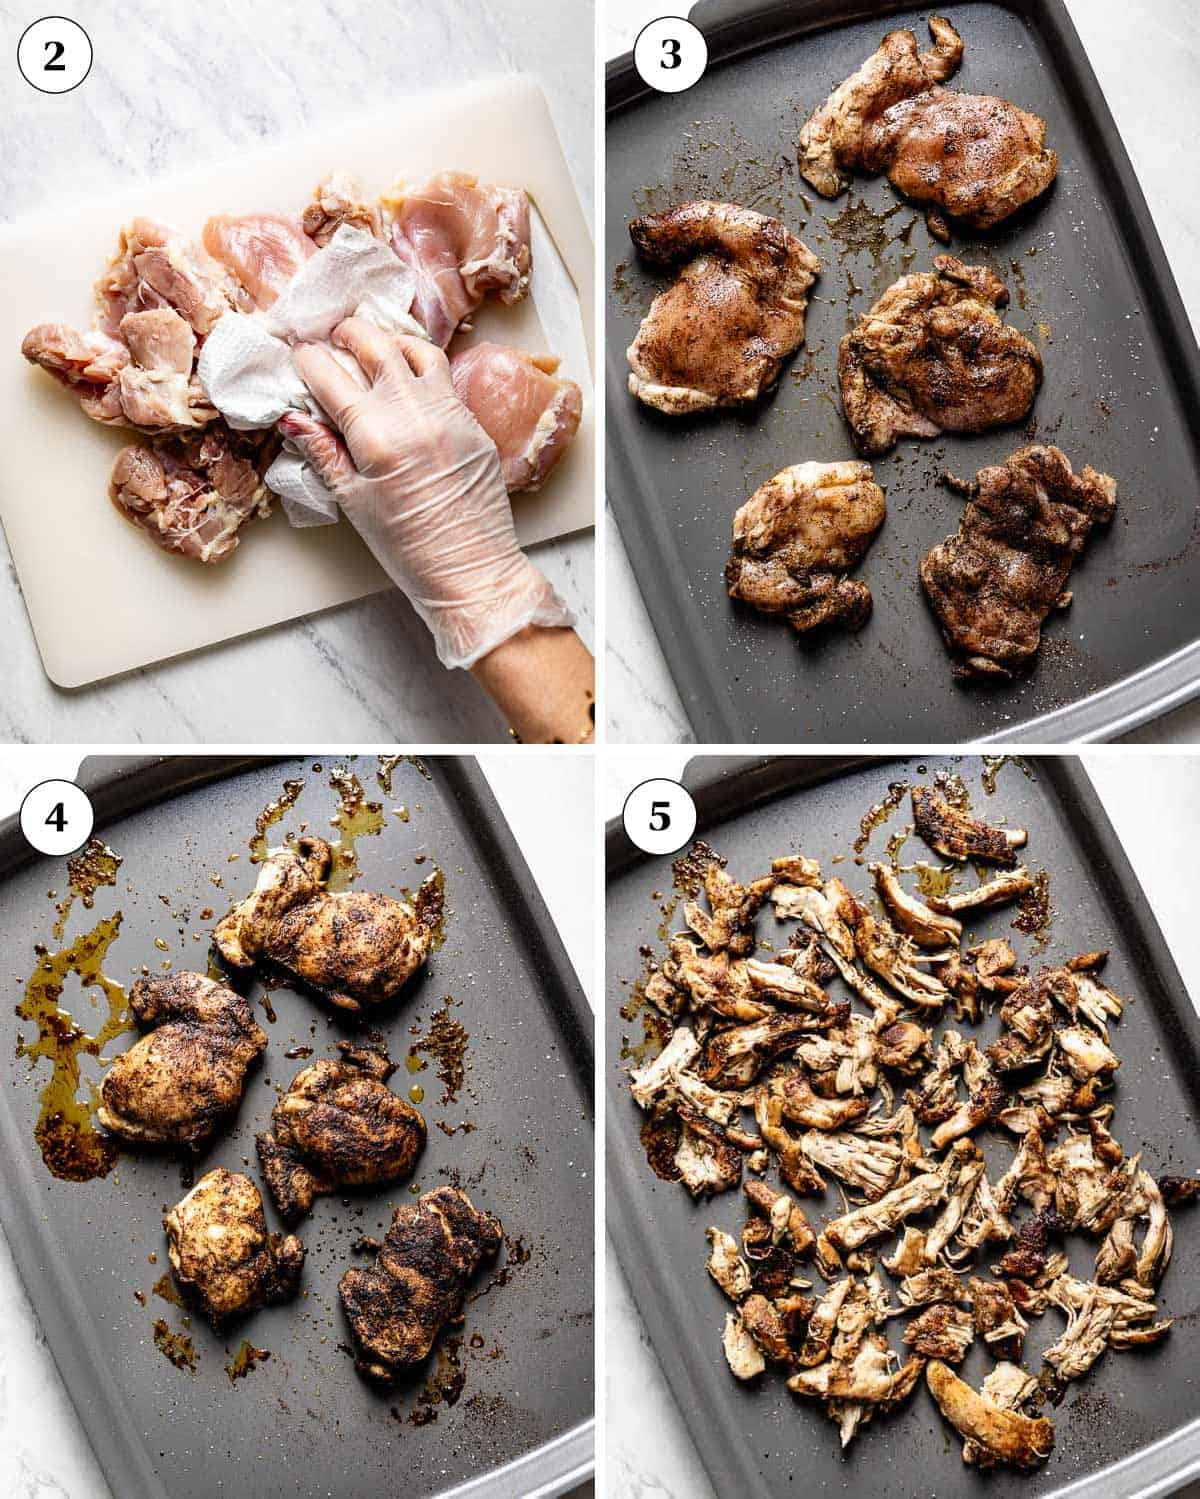 A collage of images showing how to prepare and cook chicken to make nachos.